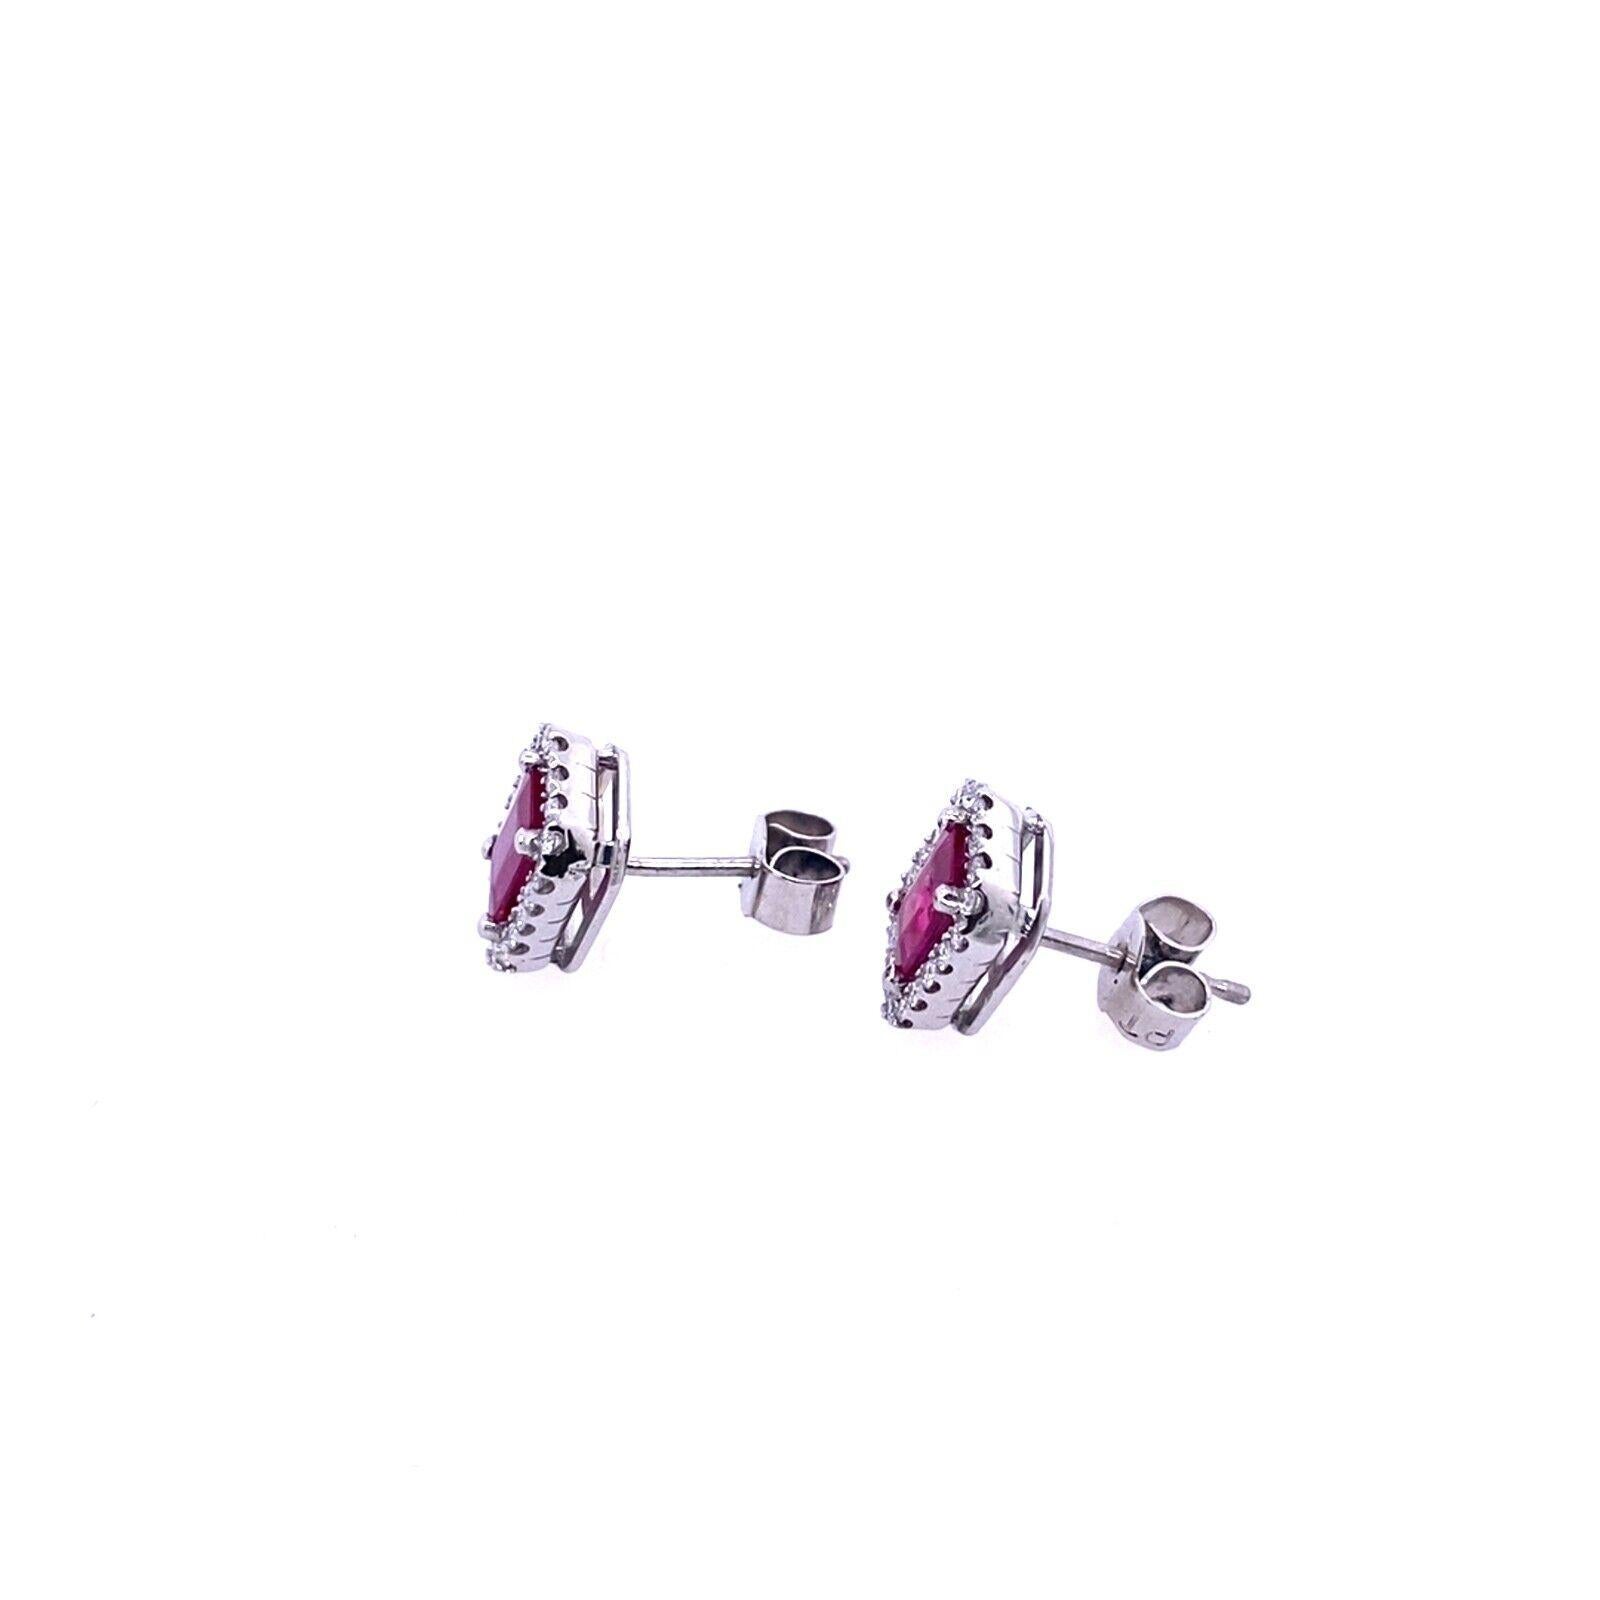 Round Cut Emerald Cut Rubies 1.24ct in Pair Set In Platinum Earrings, With 0.33ct Diamonds For Sale